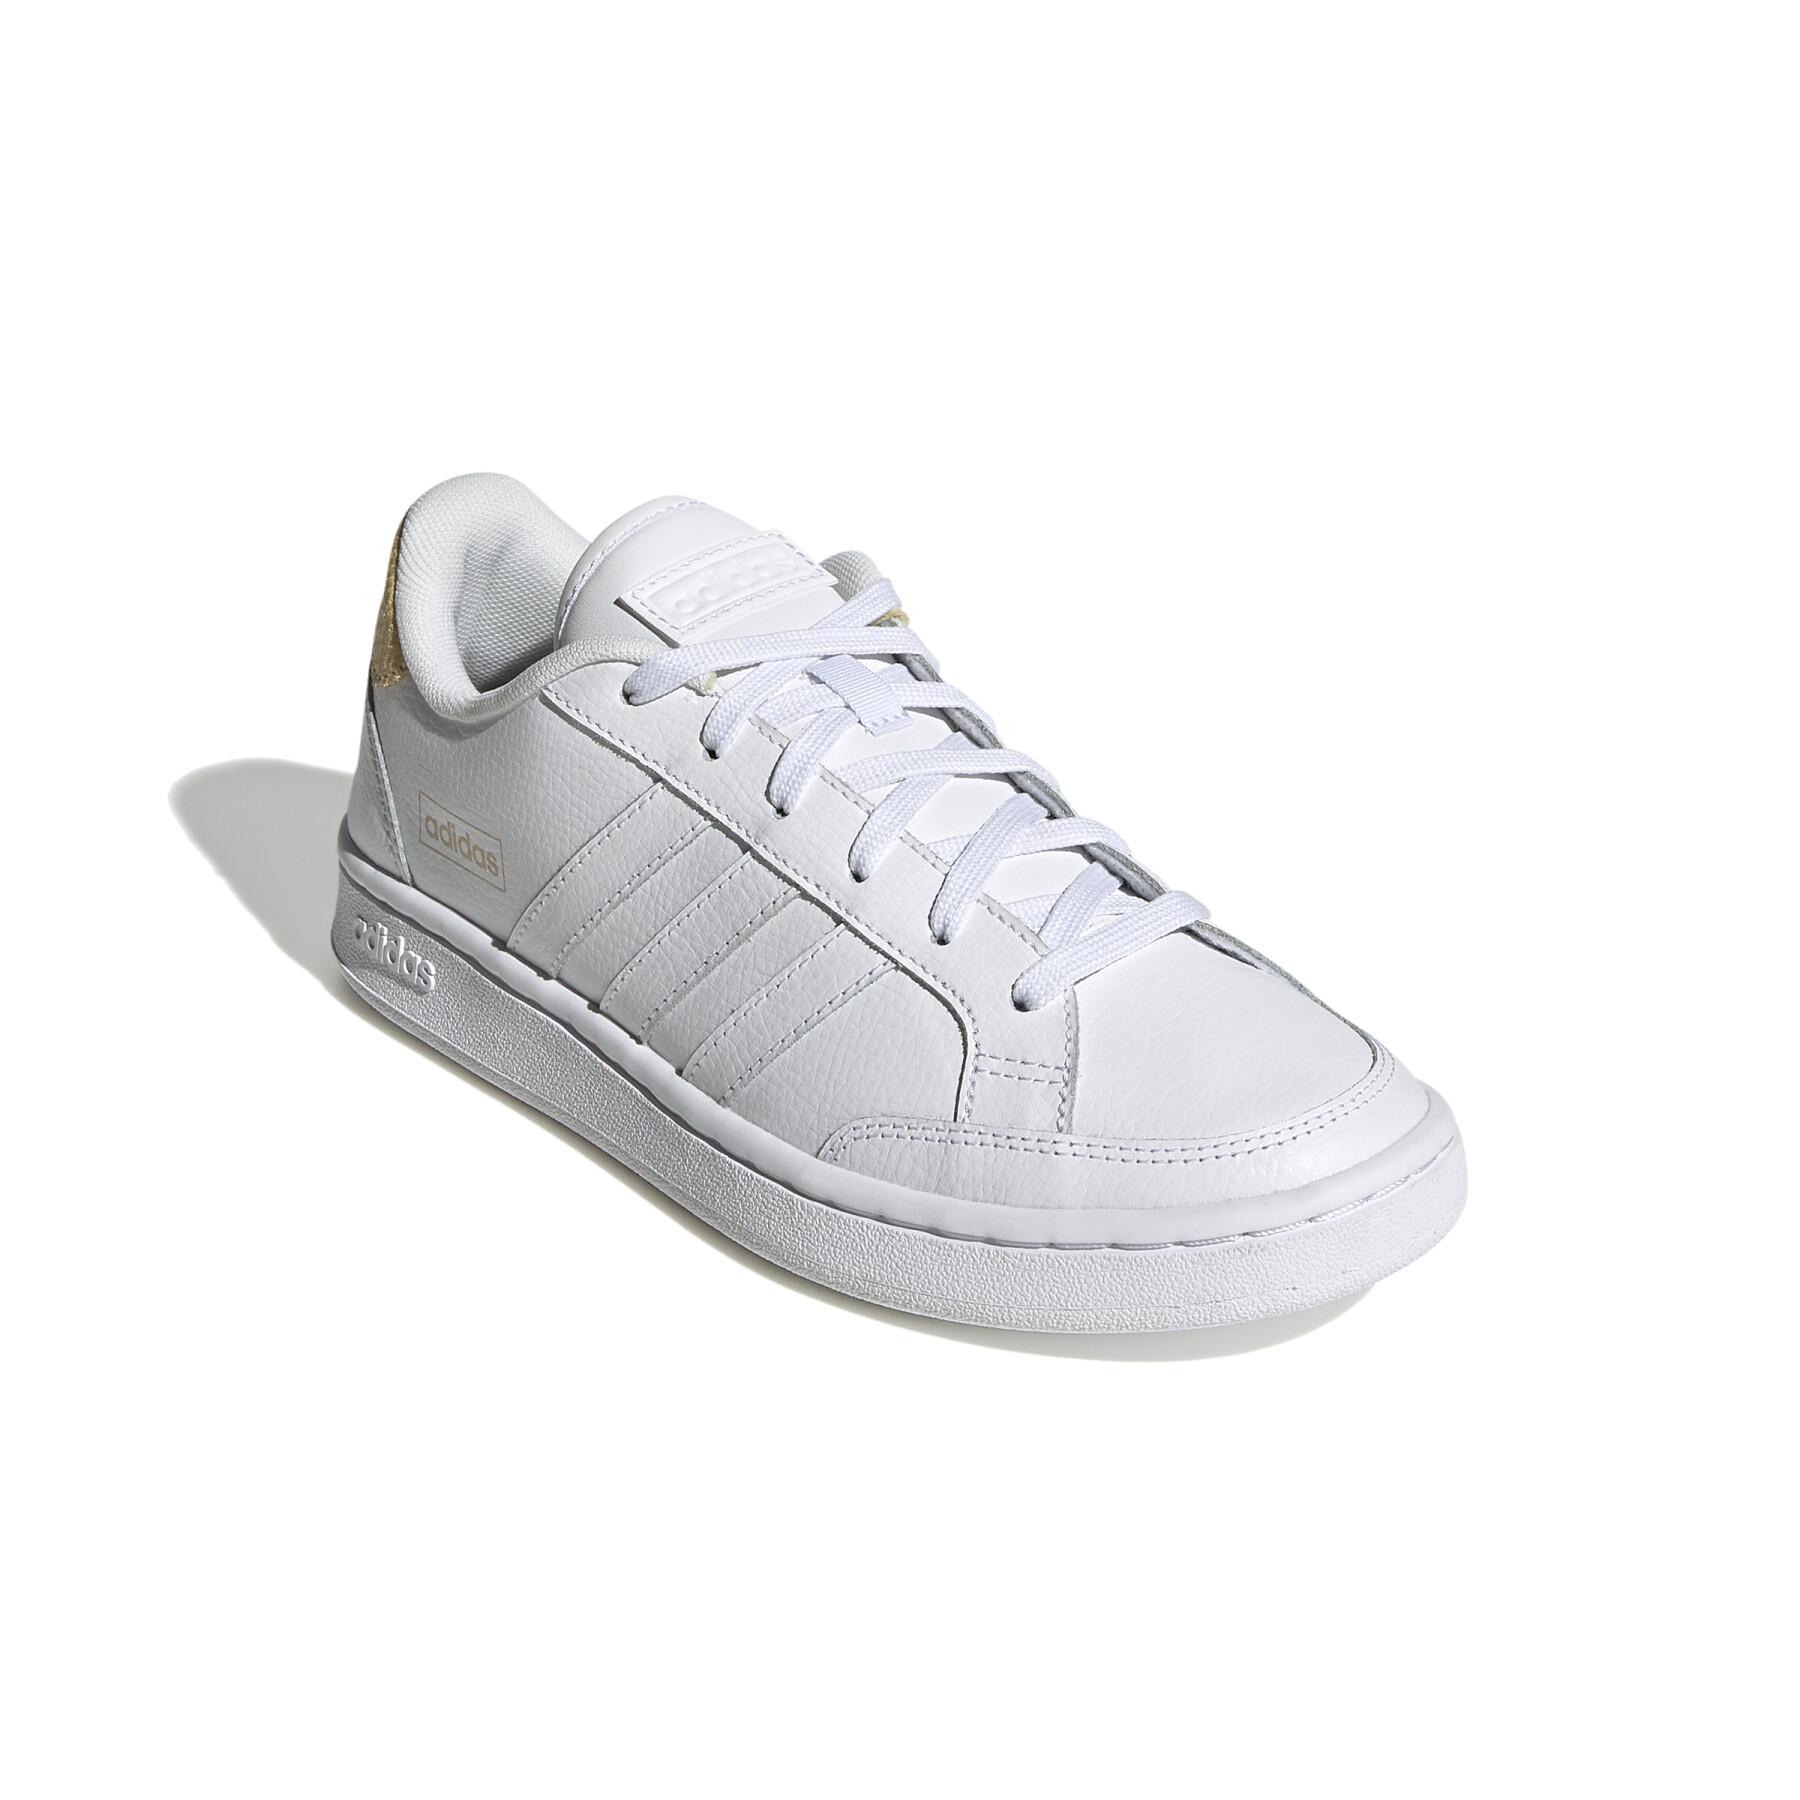 Women's sneakers adidas Grand Court SE